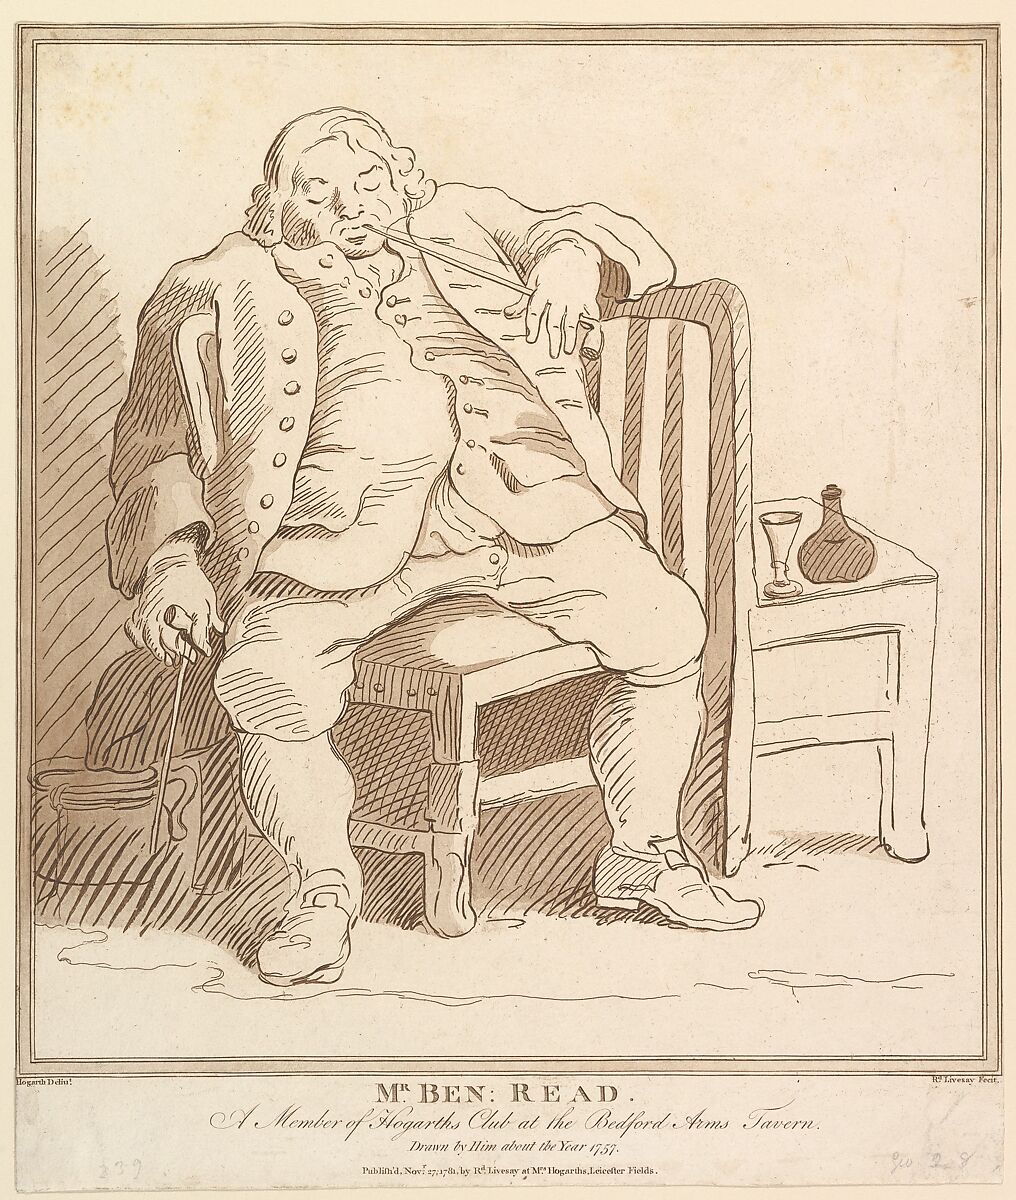 Mr. Ben: Read, A Member of Hogarth's Club at the Bedford Arms Tavern, Drawn by him about the Year 1757, Etched and published by Richard Livesay (British, 1750–1826 Southsea, near Portsmouth, Hampshire), Etching and aquatint, printed in brown ink 